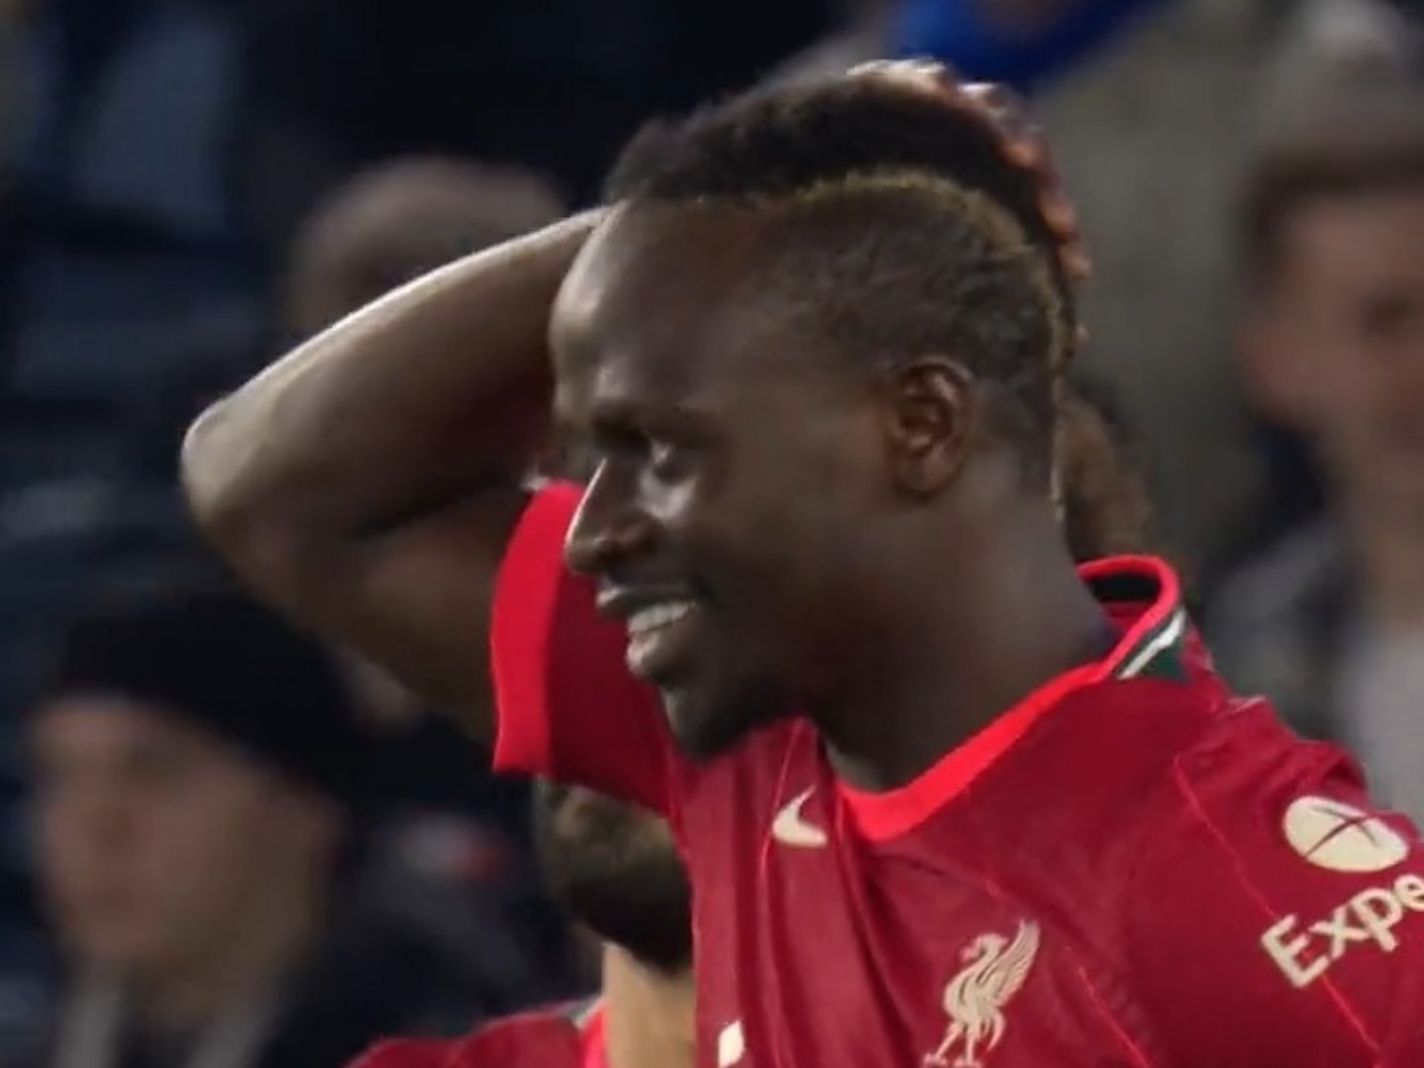 Sadio Mane gets annihilated on social media after Liverpool fall to Leicester in shock defeat